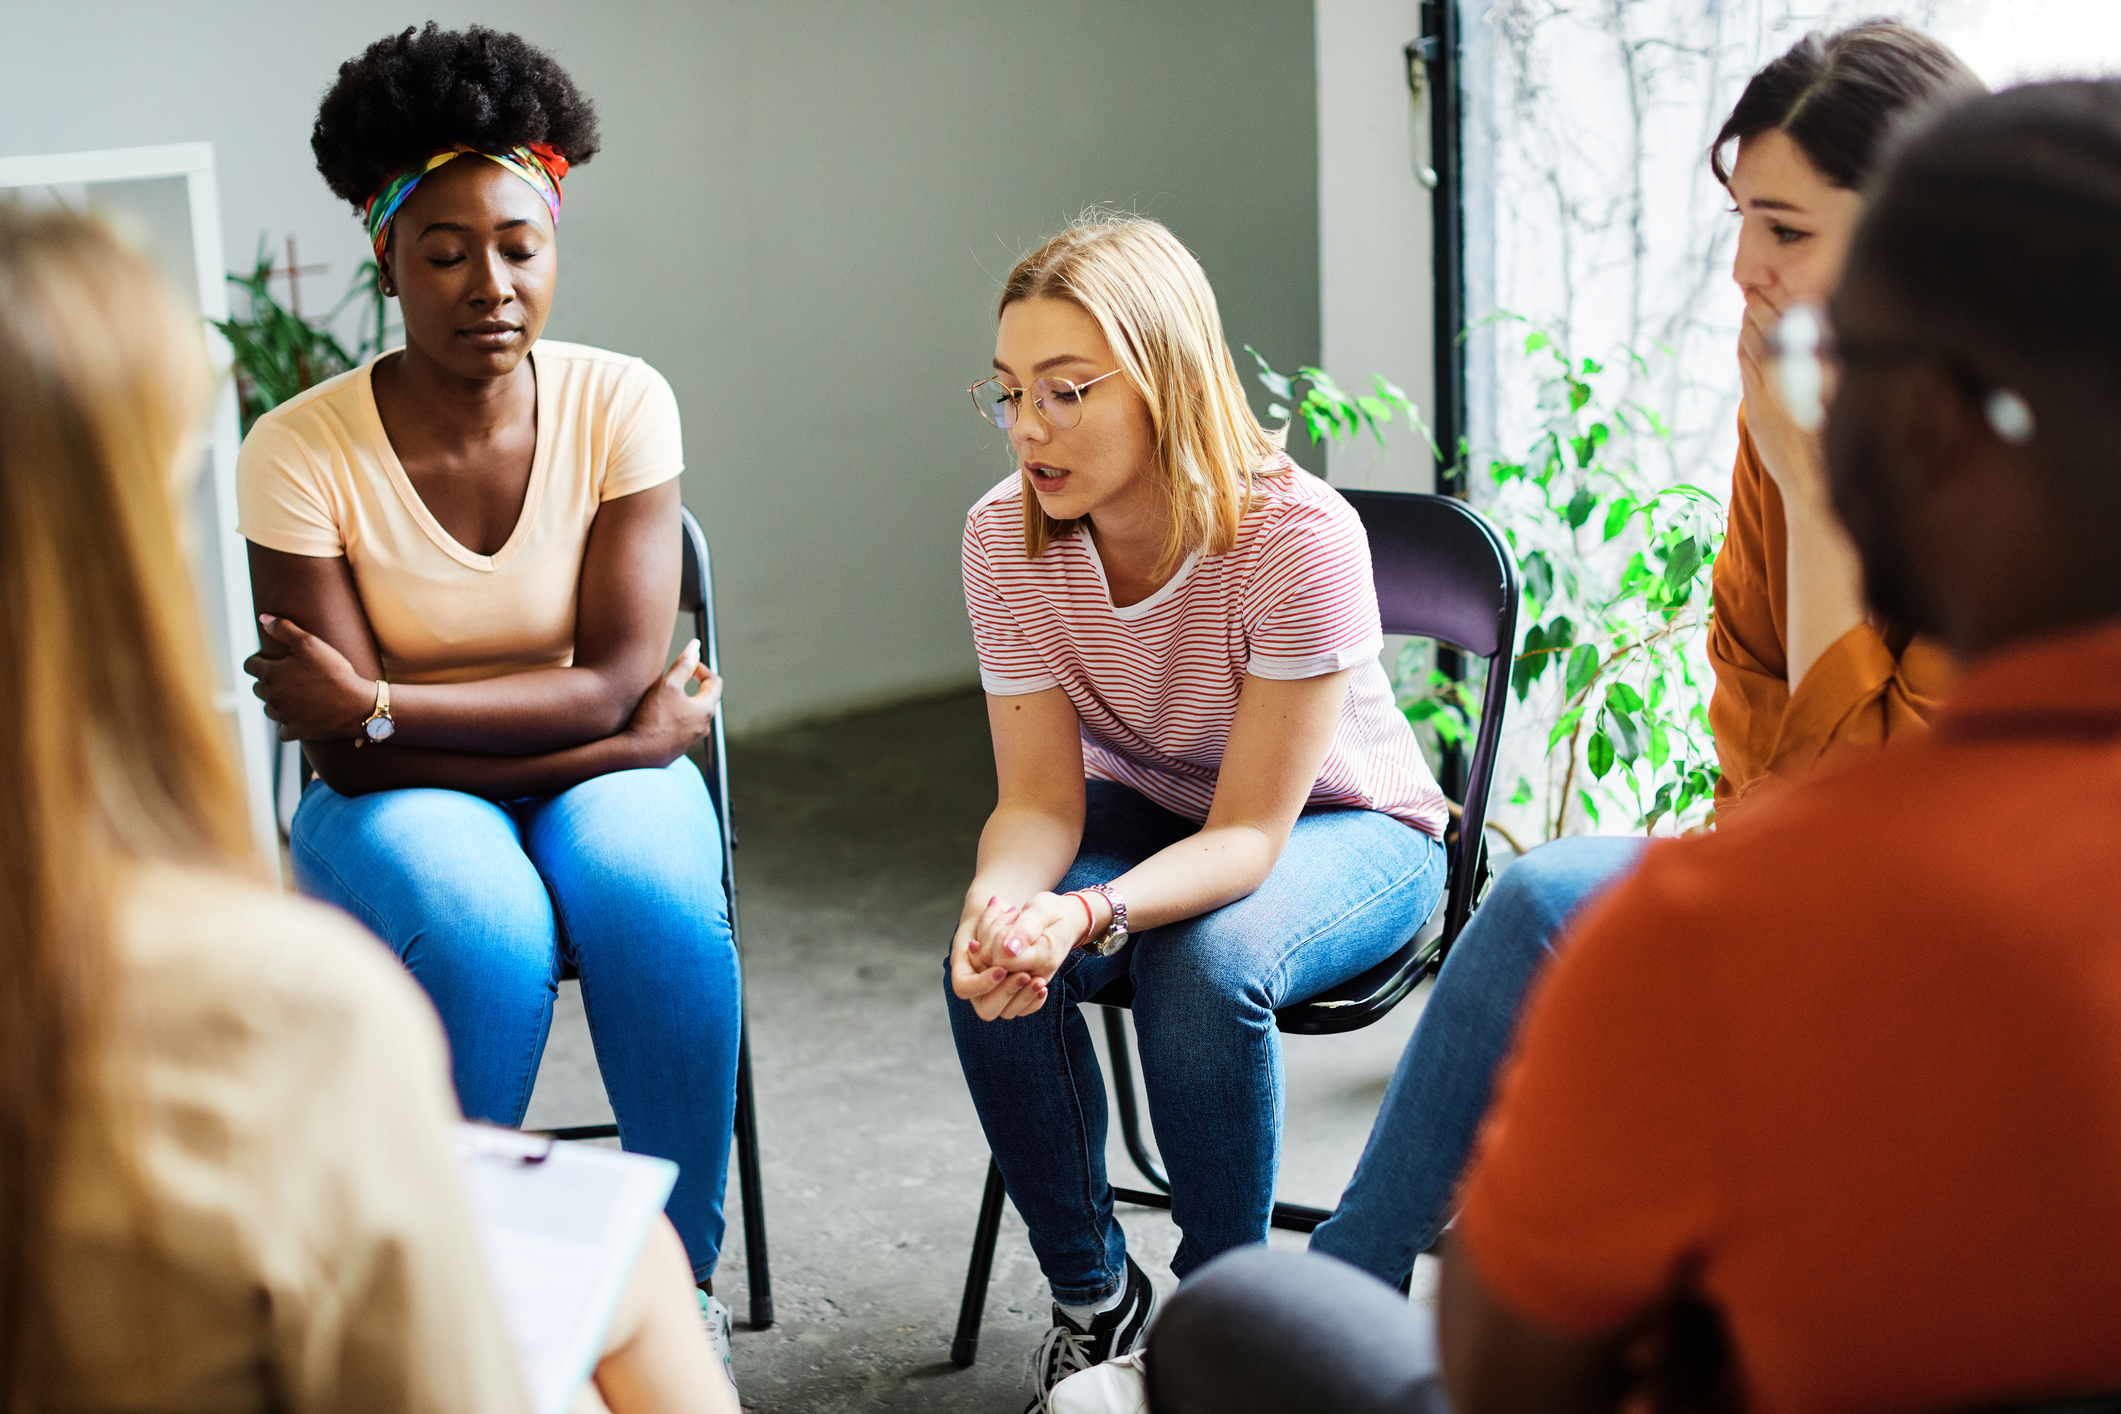 Group of adults in a discussion circle, likely in a workshop or support group setting